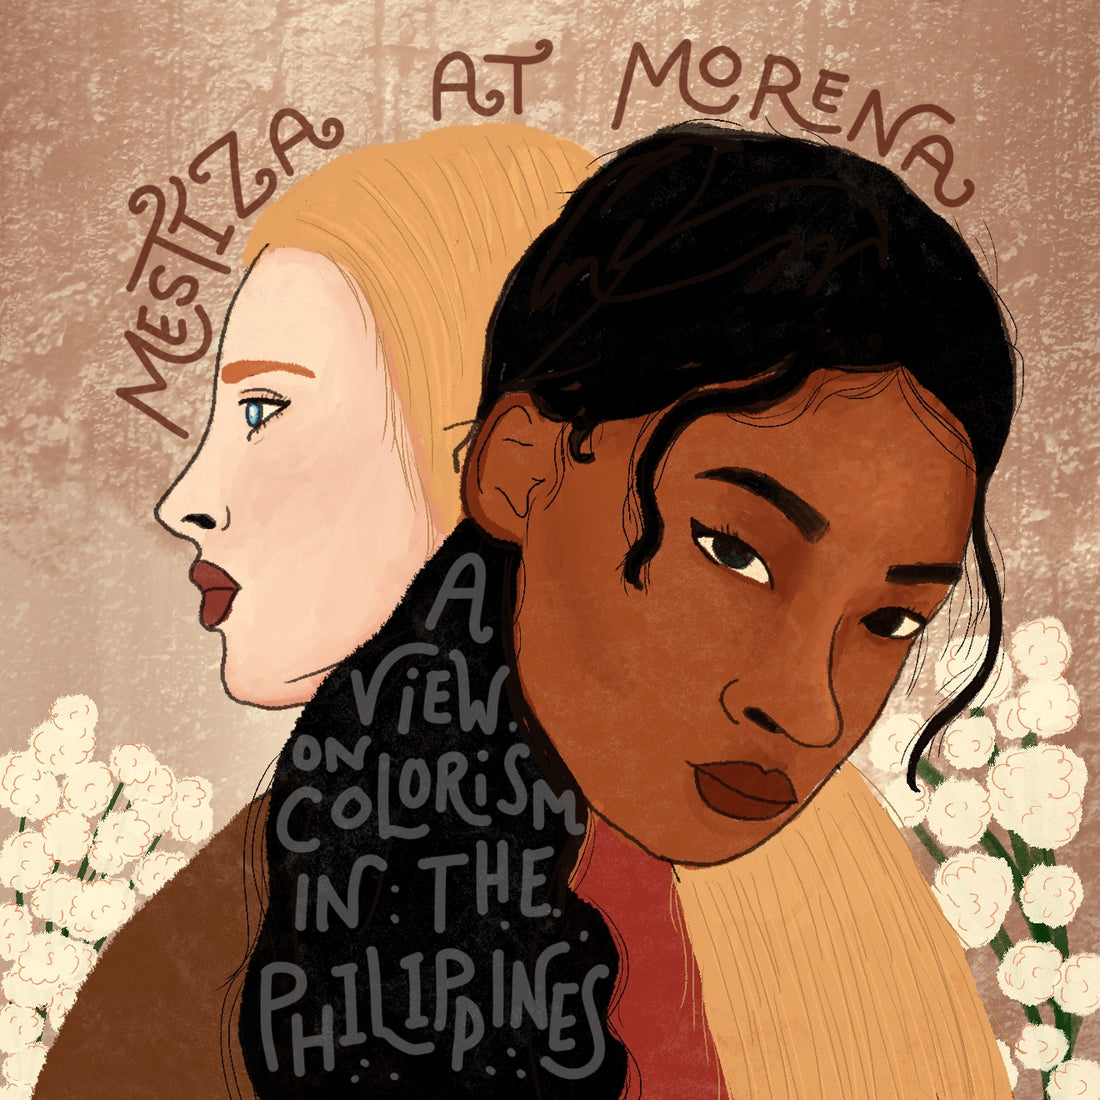 Mestiza and Morena: A view on colorism in the Philippines